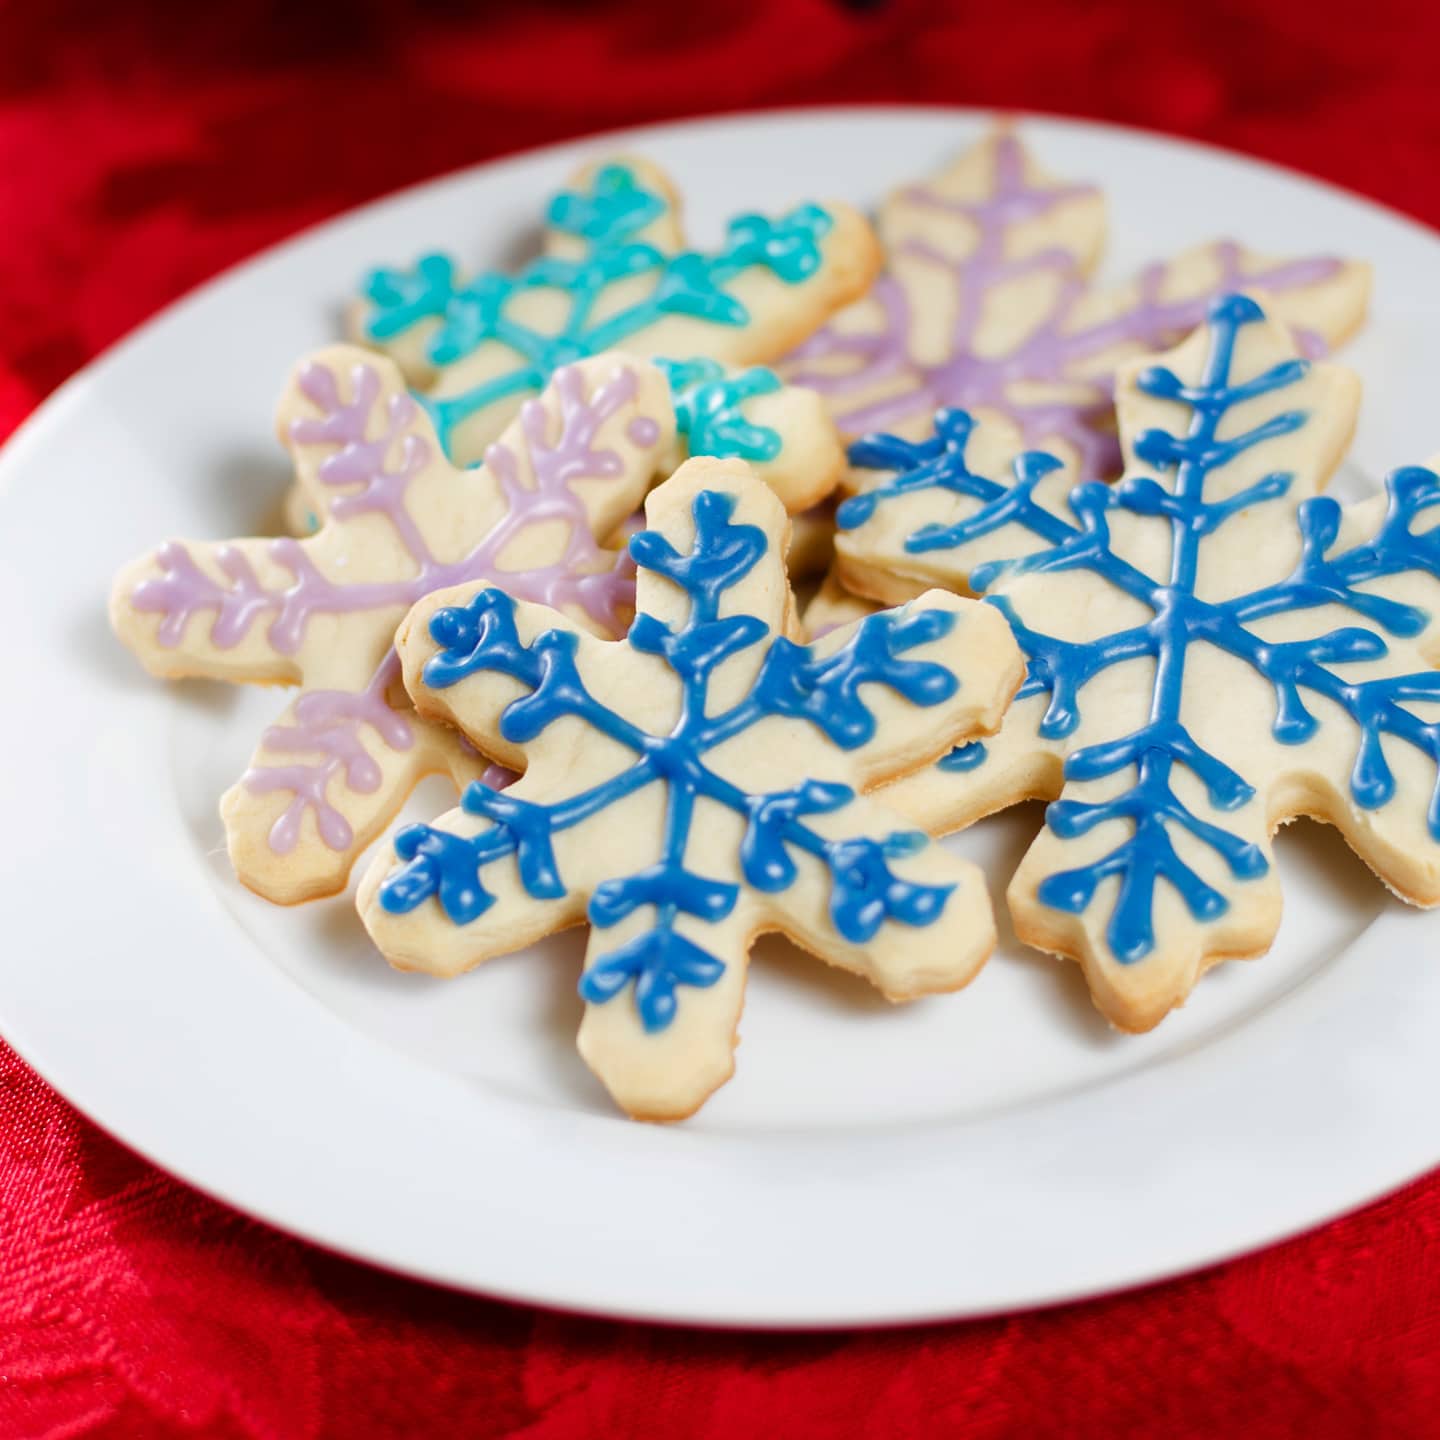 Snowflake sugar cookies with blue and pink royal icing lines drawn on them